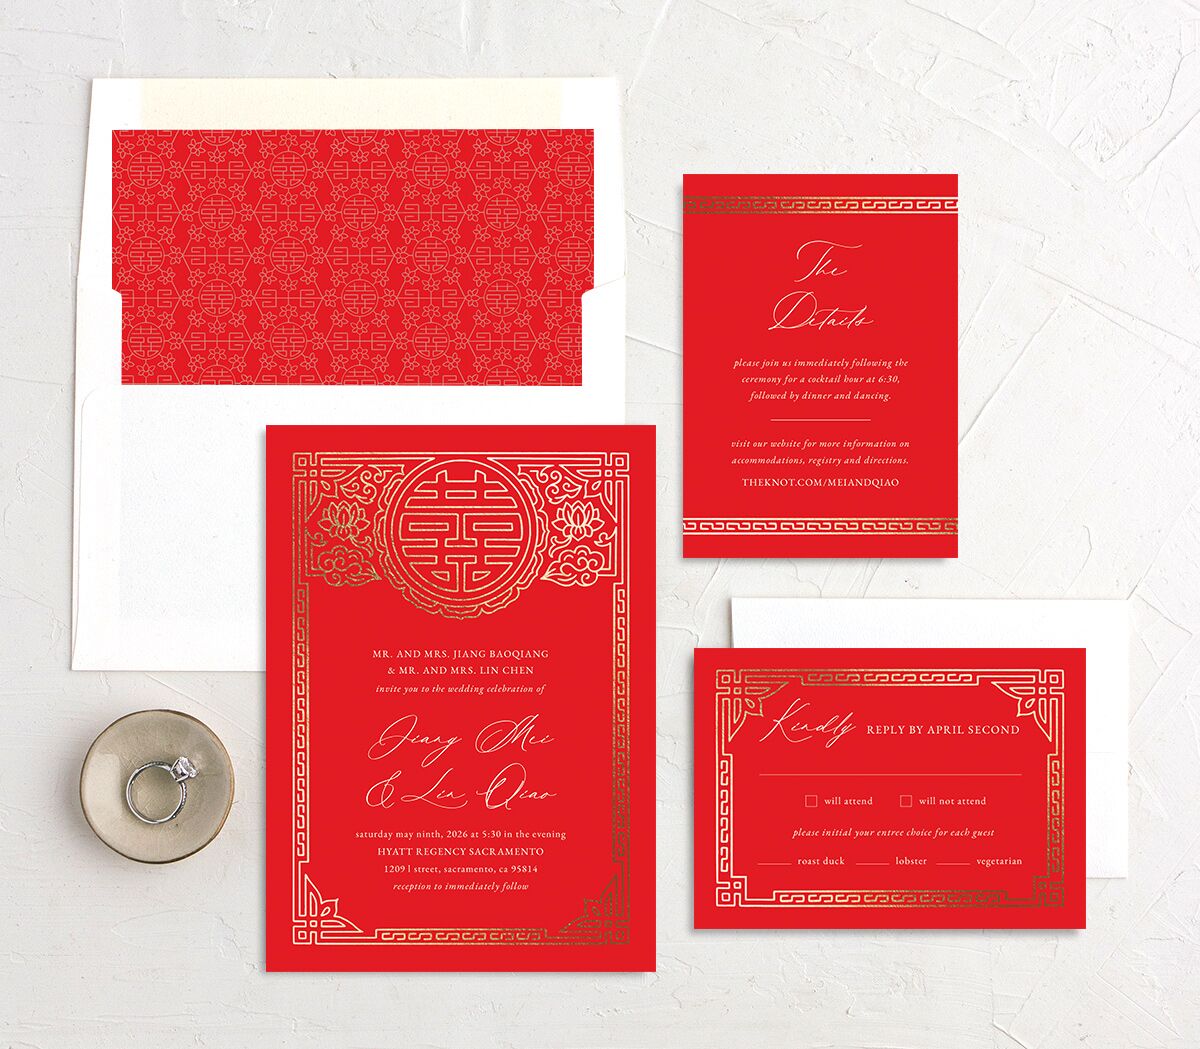 Double Happiness Wedding Invitations suite in red